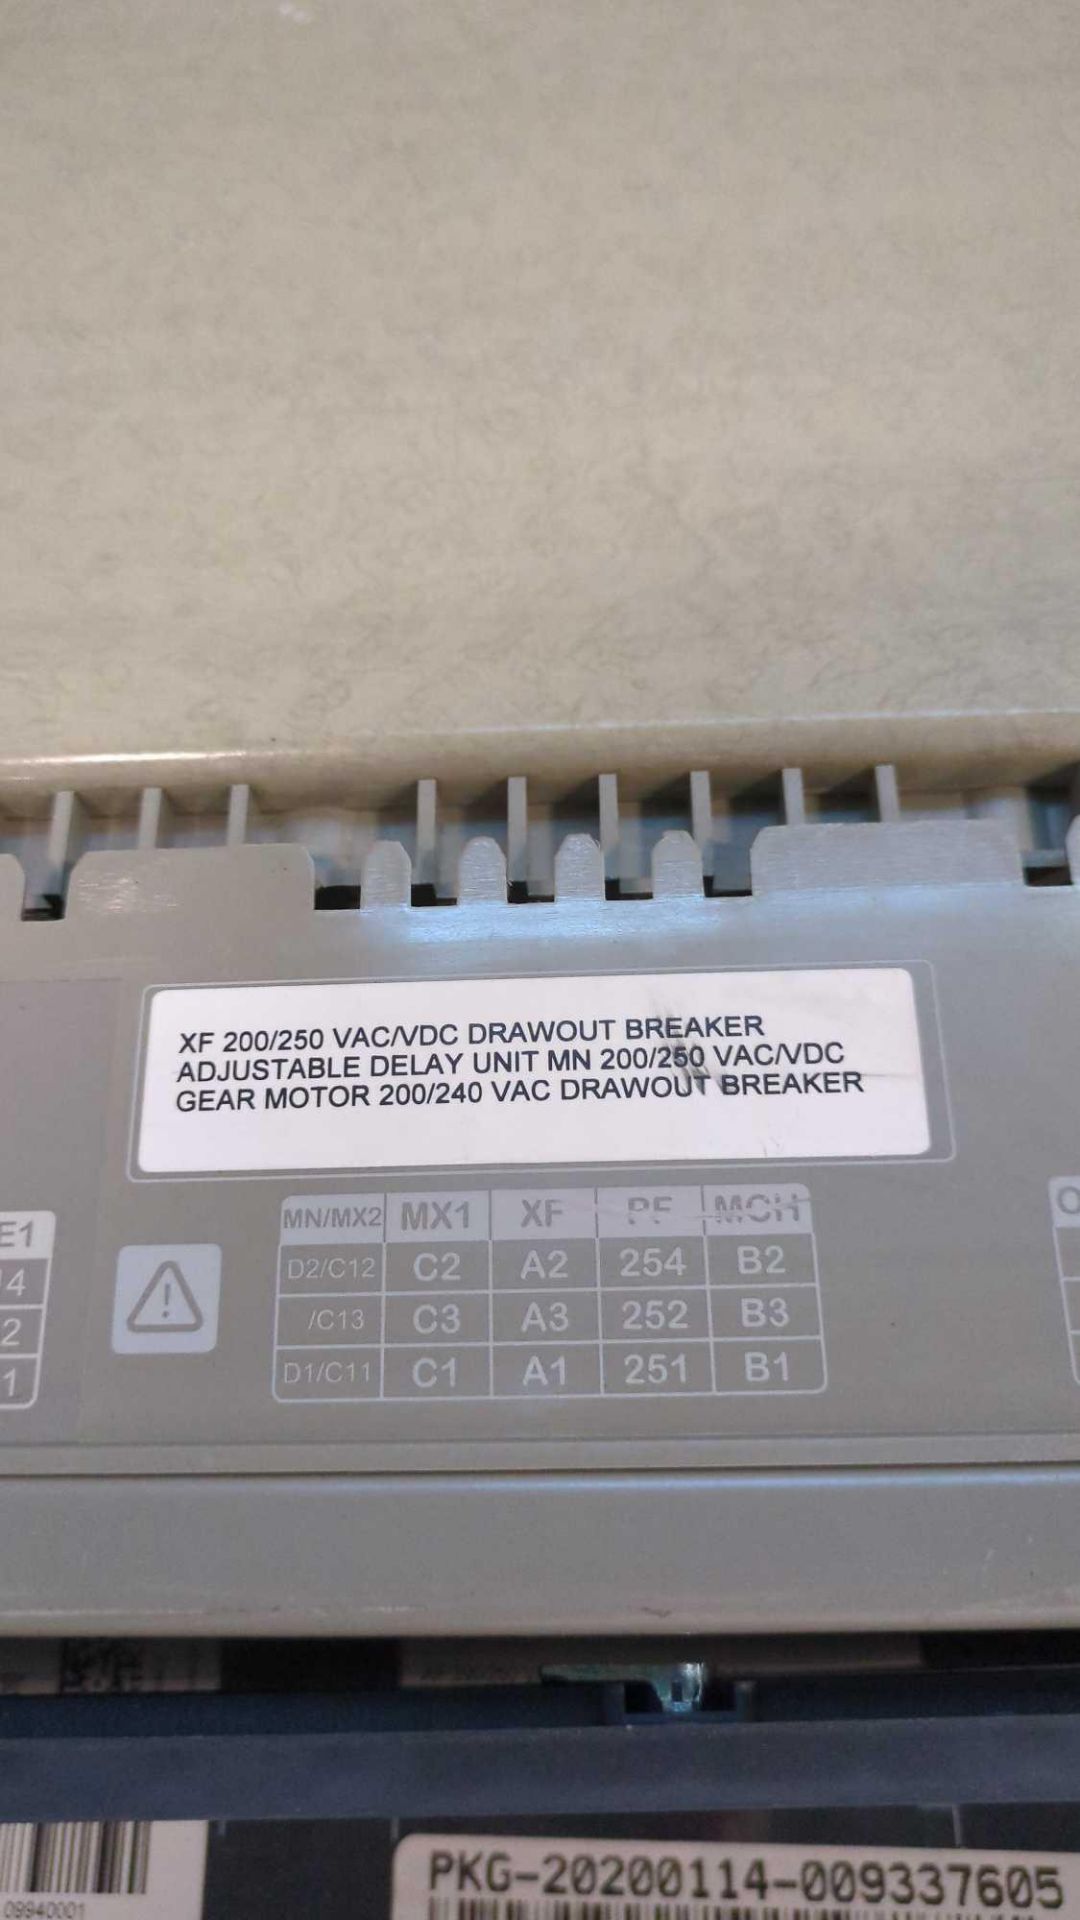 Schneider electric XF 200/250 vac/vdc drawout breaker - Image 7 of 8